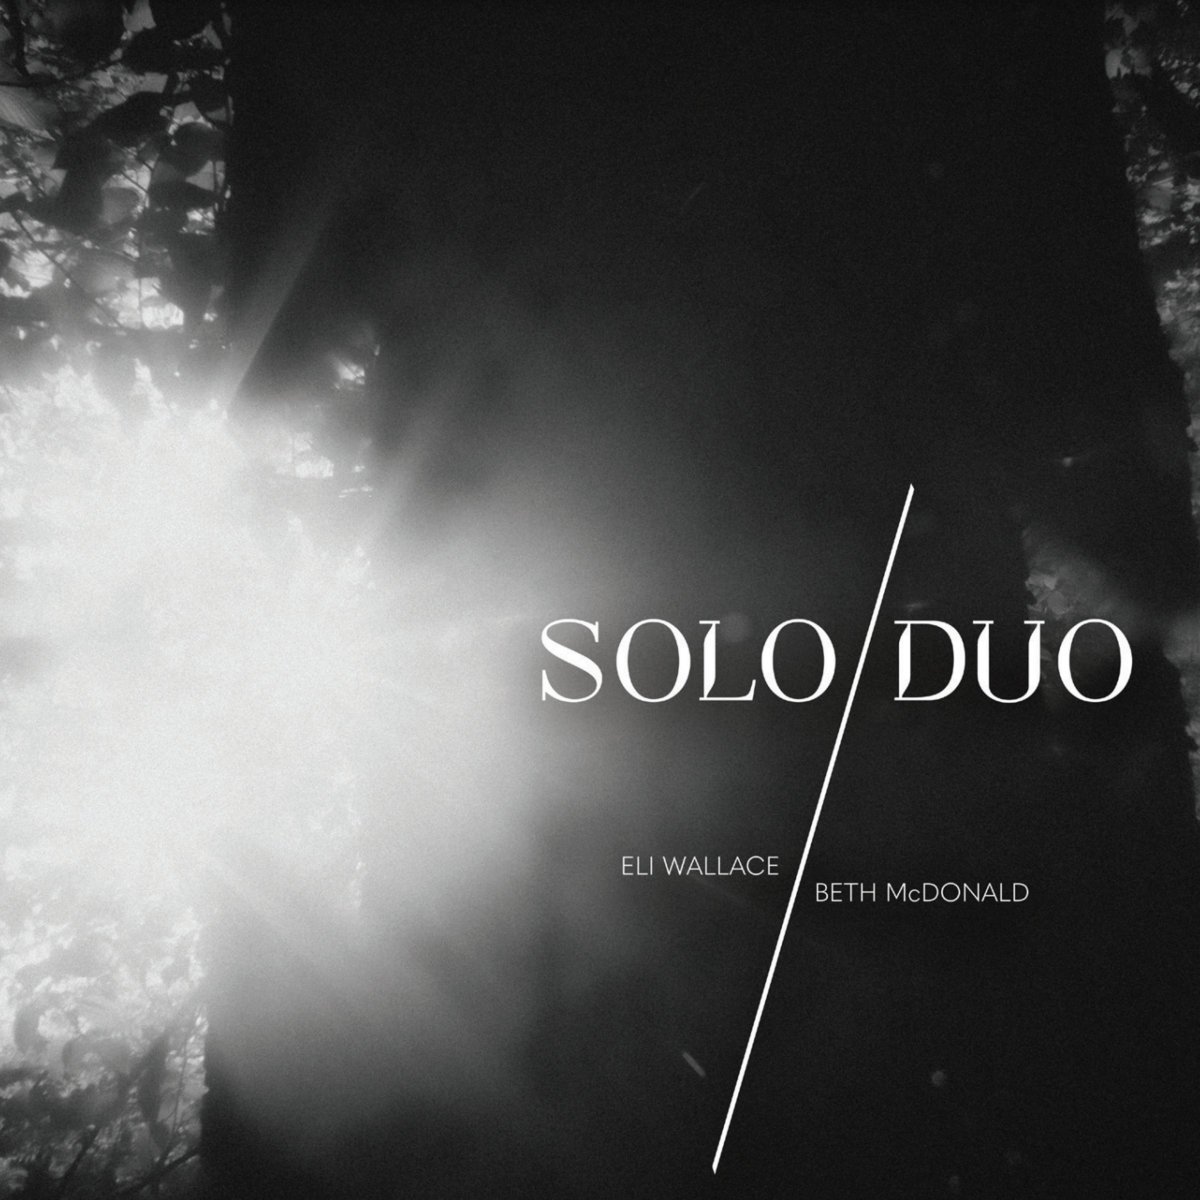 solo/duo with Eli Wallace (2020.12.14)